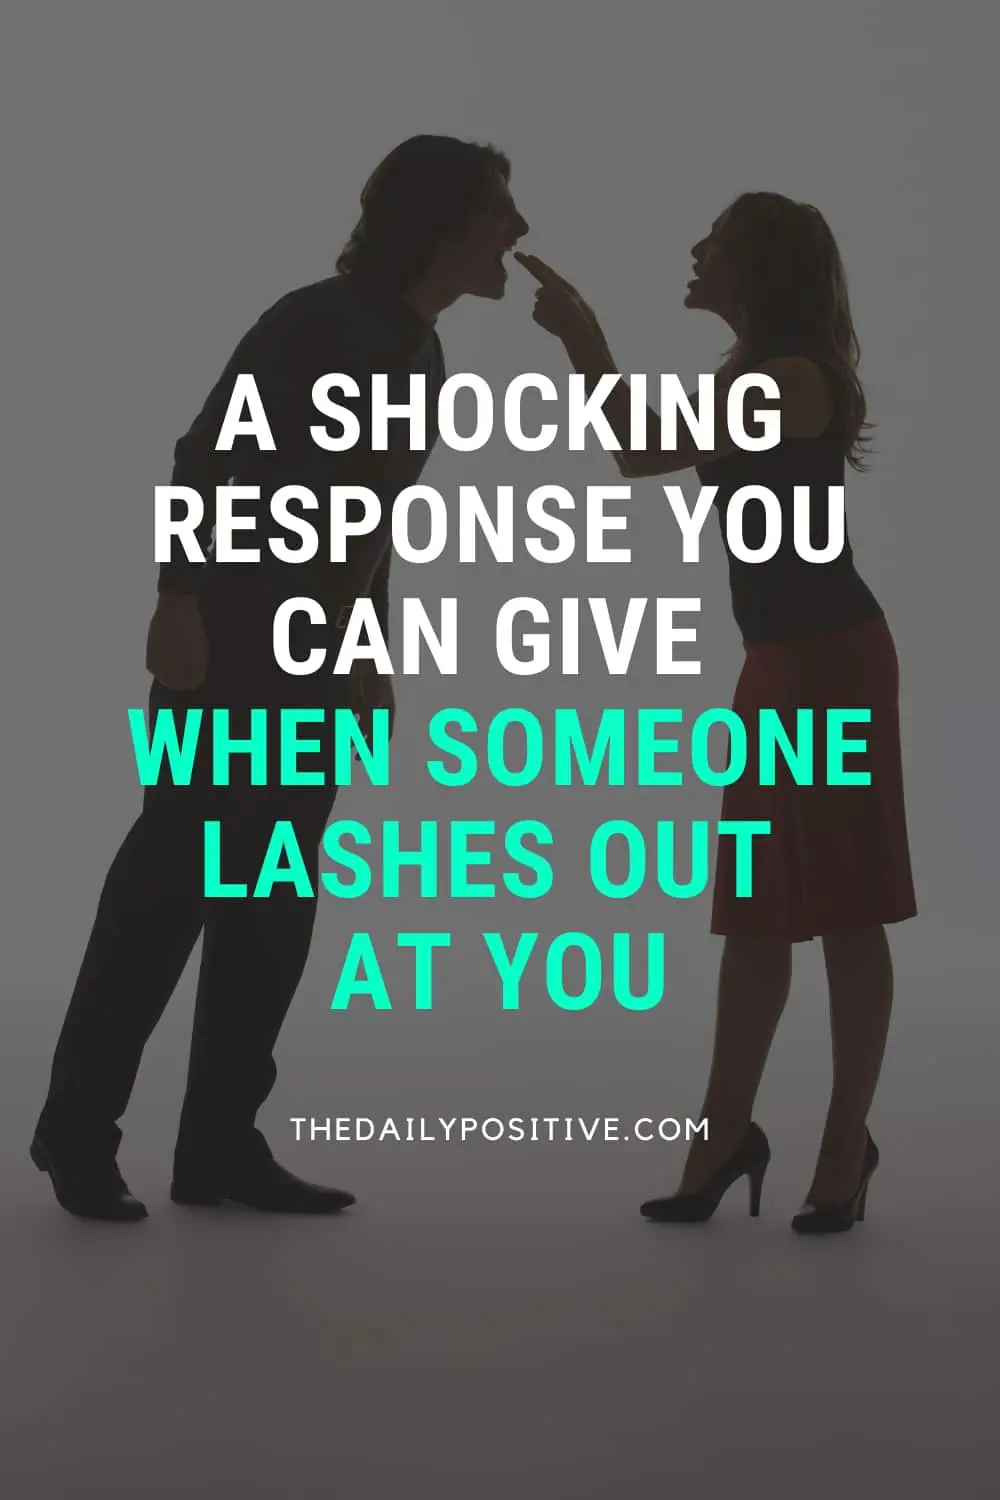 A Shocking Response You Can Give When Someone Lashes Out at You